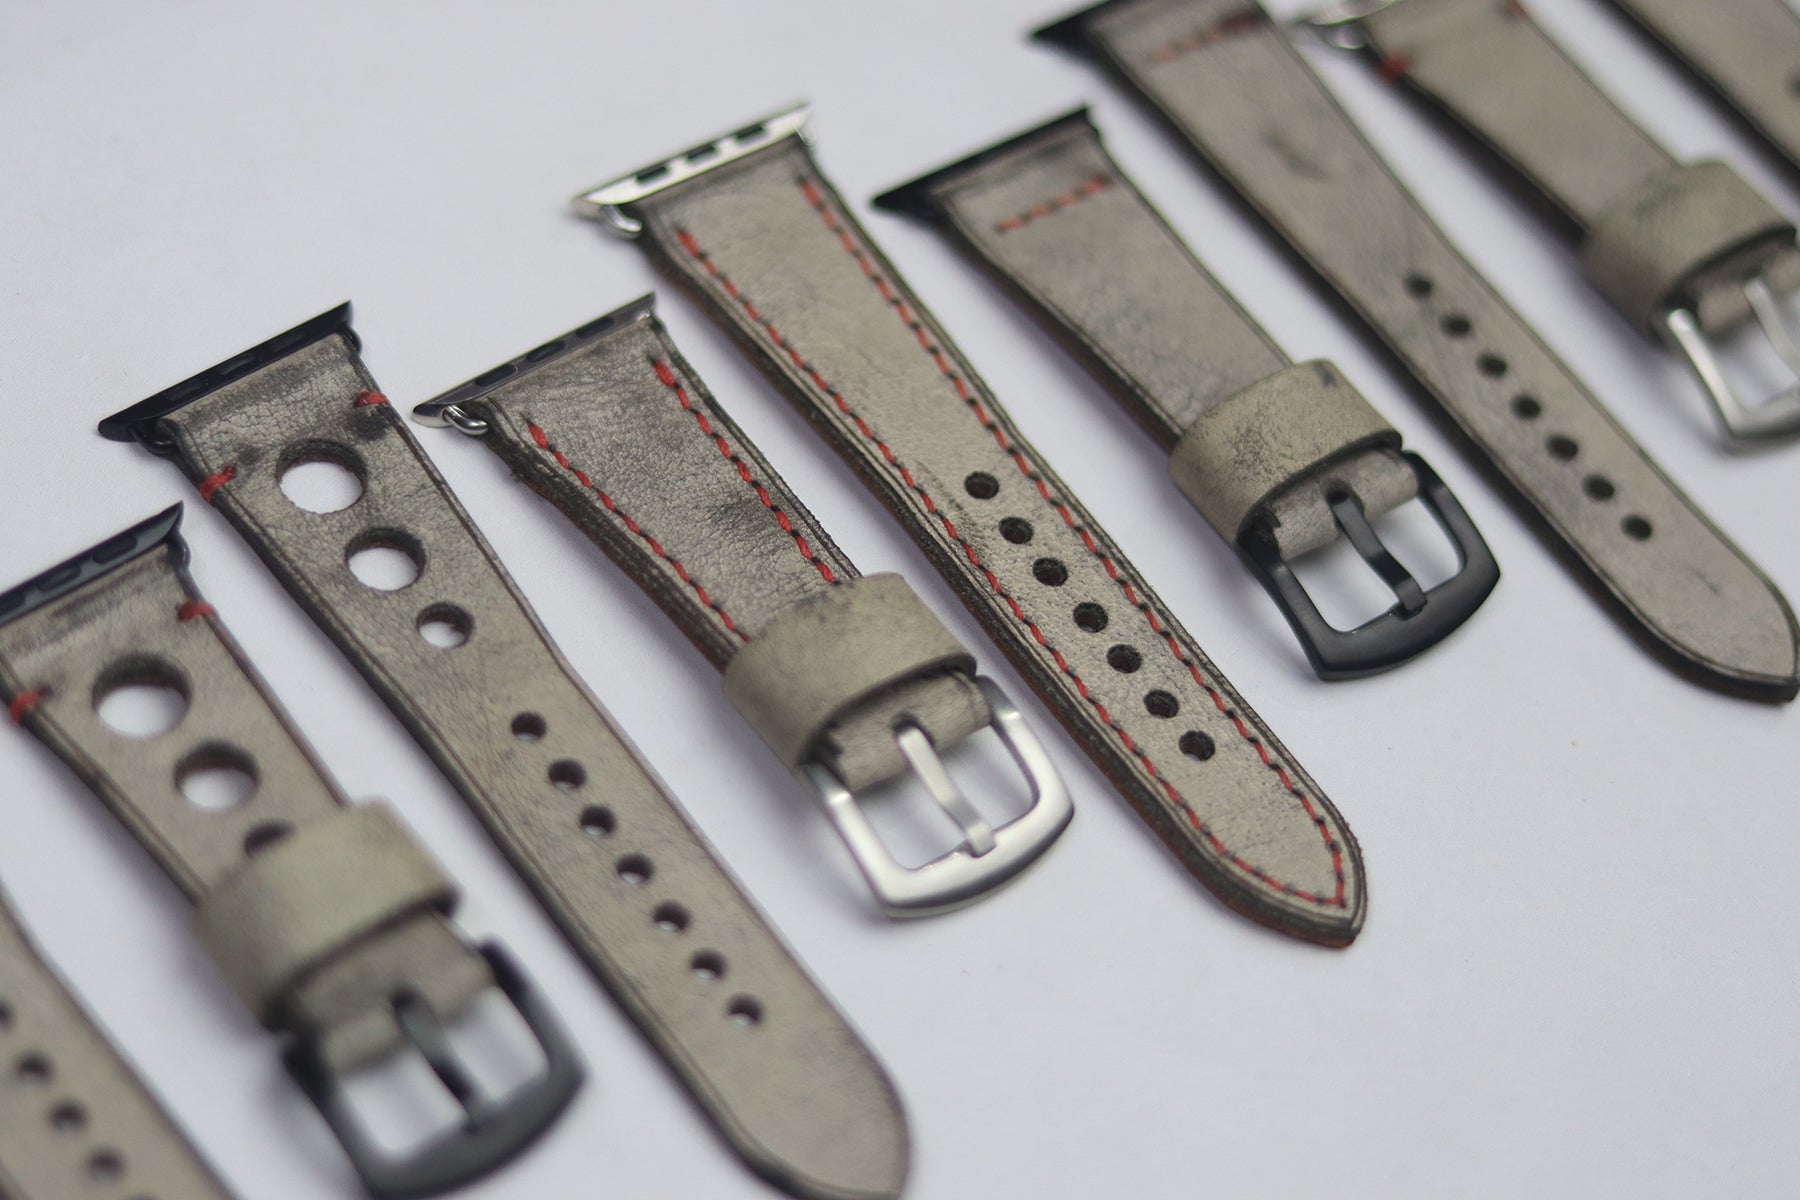 HARBOR GREY HAND-CRAFTED APPLE WATCH STRAPS